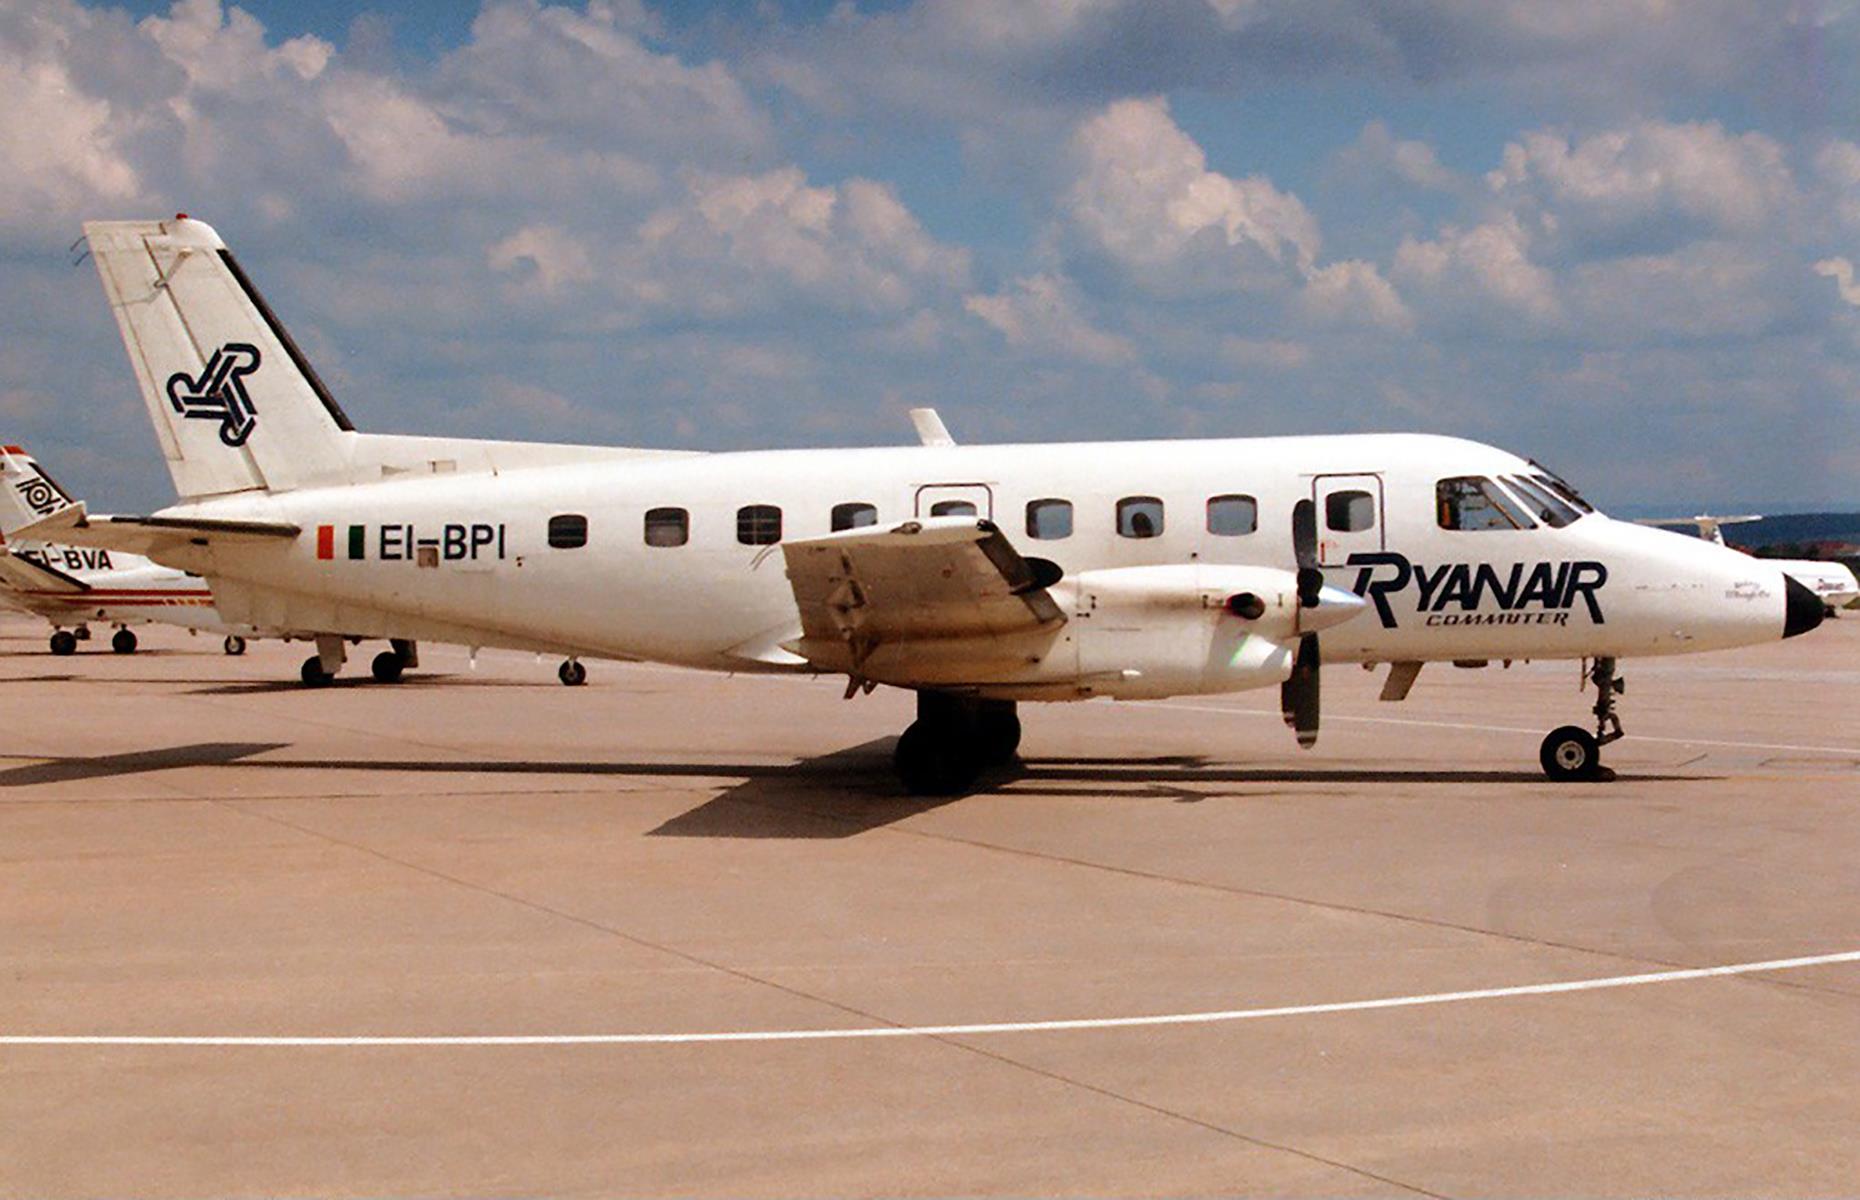 The fate of Laker Airways didn't stop the rise of other low-cost carriers though, and Ryanair launched in 1985. Early services covered short distances, with the first flights operating from Ireland's Waterford to London Gatwick. Ryanair set the bar for today's budget airlines and it's now one of Europe's largest carriers. A branded aircraft is pictured here at Stuttgart Airport in 1988.